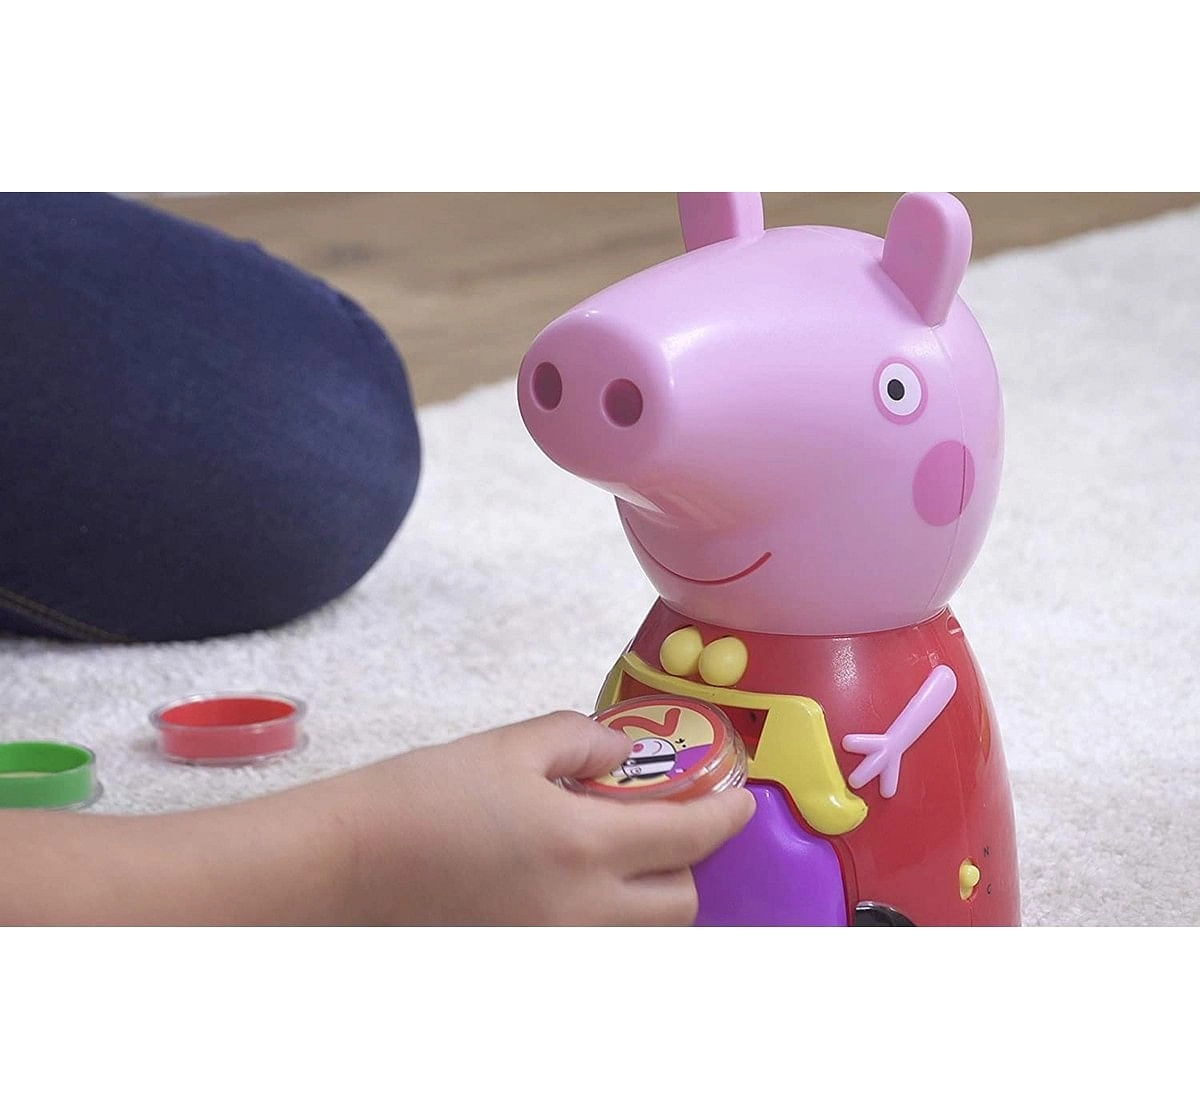 Peppa Pig Count With Learning Toys for Kids age 2Y+ 